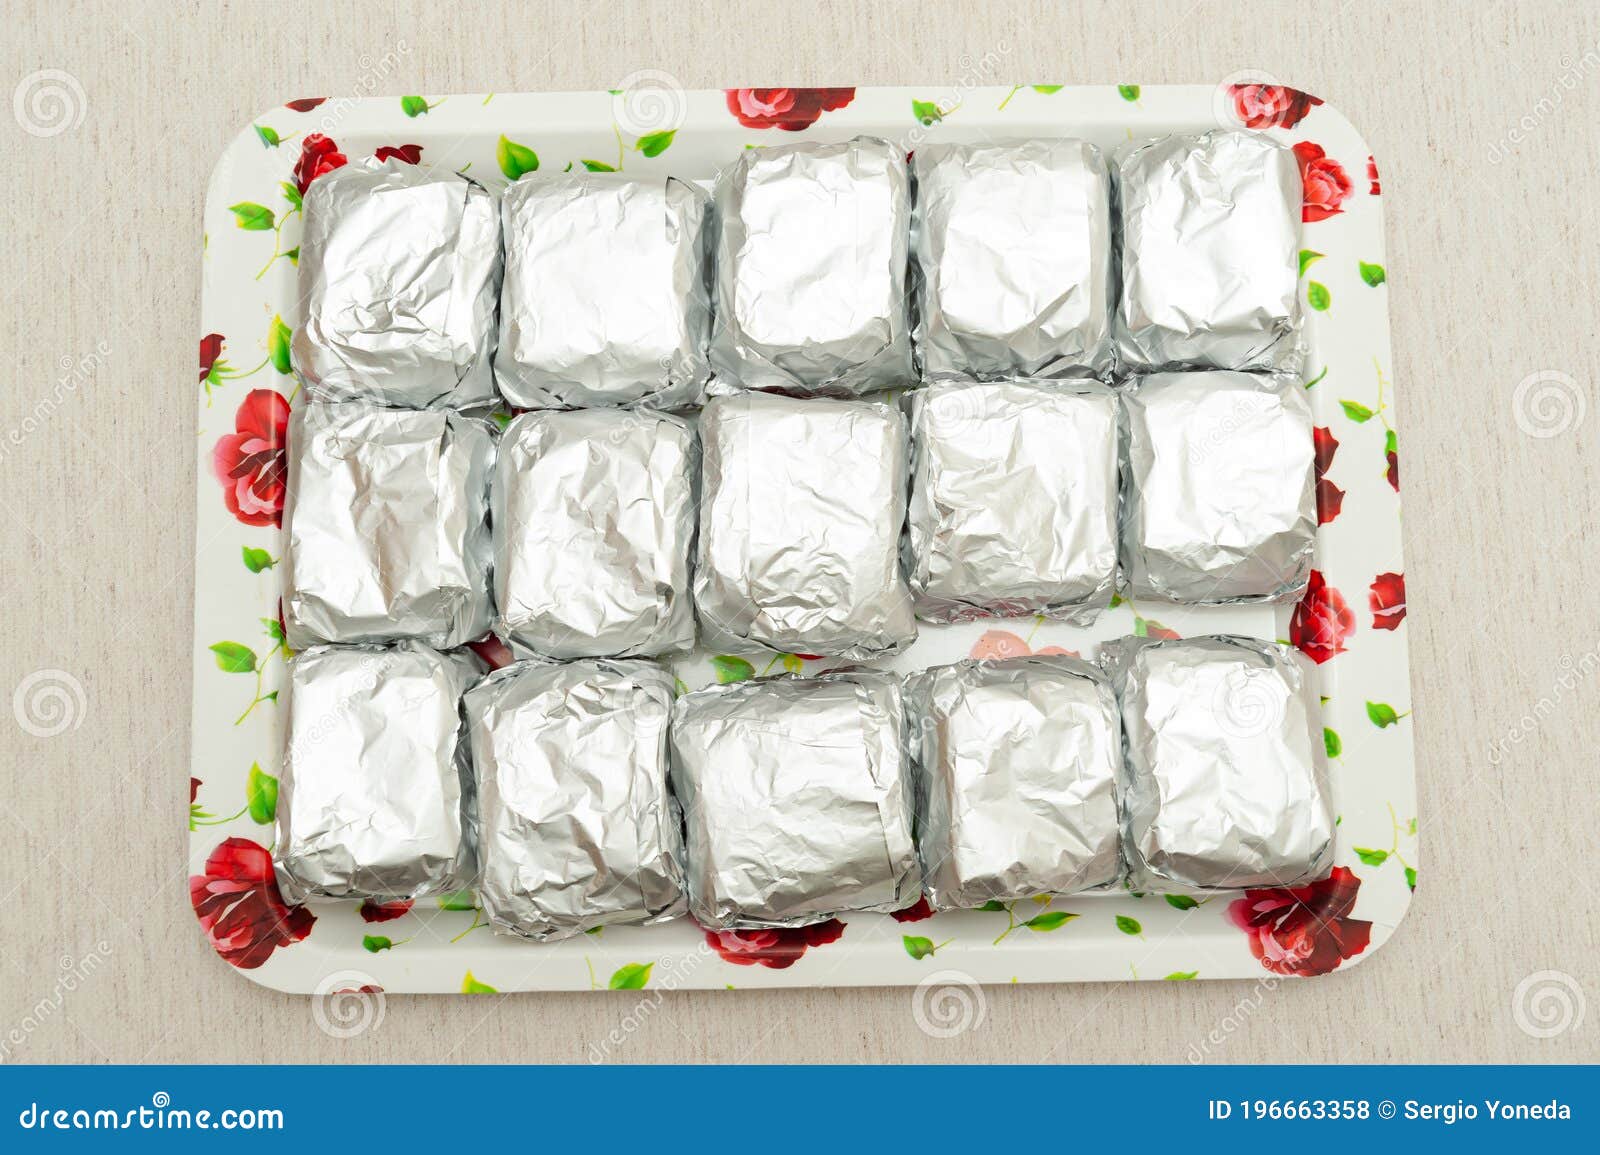 traditional brazilian dessert known as bolo gelado in portuguese - making step by step: cakes wrapped in aluminum foil